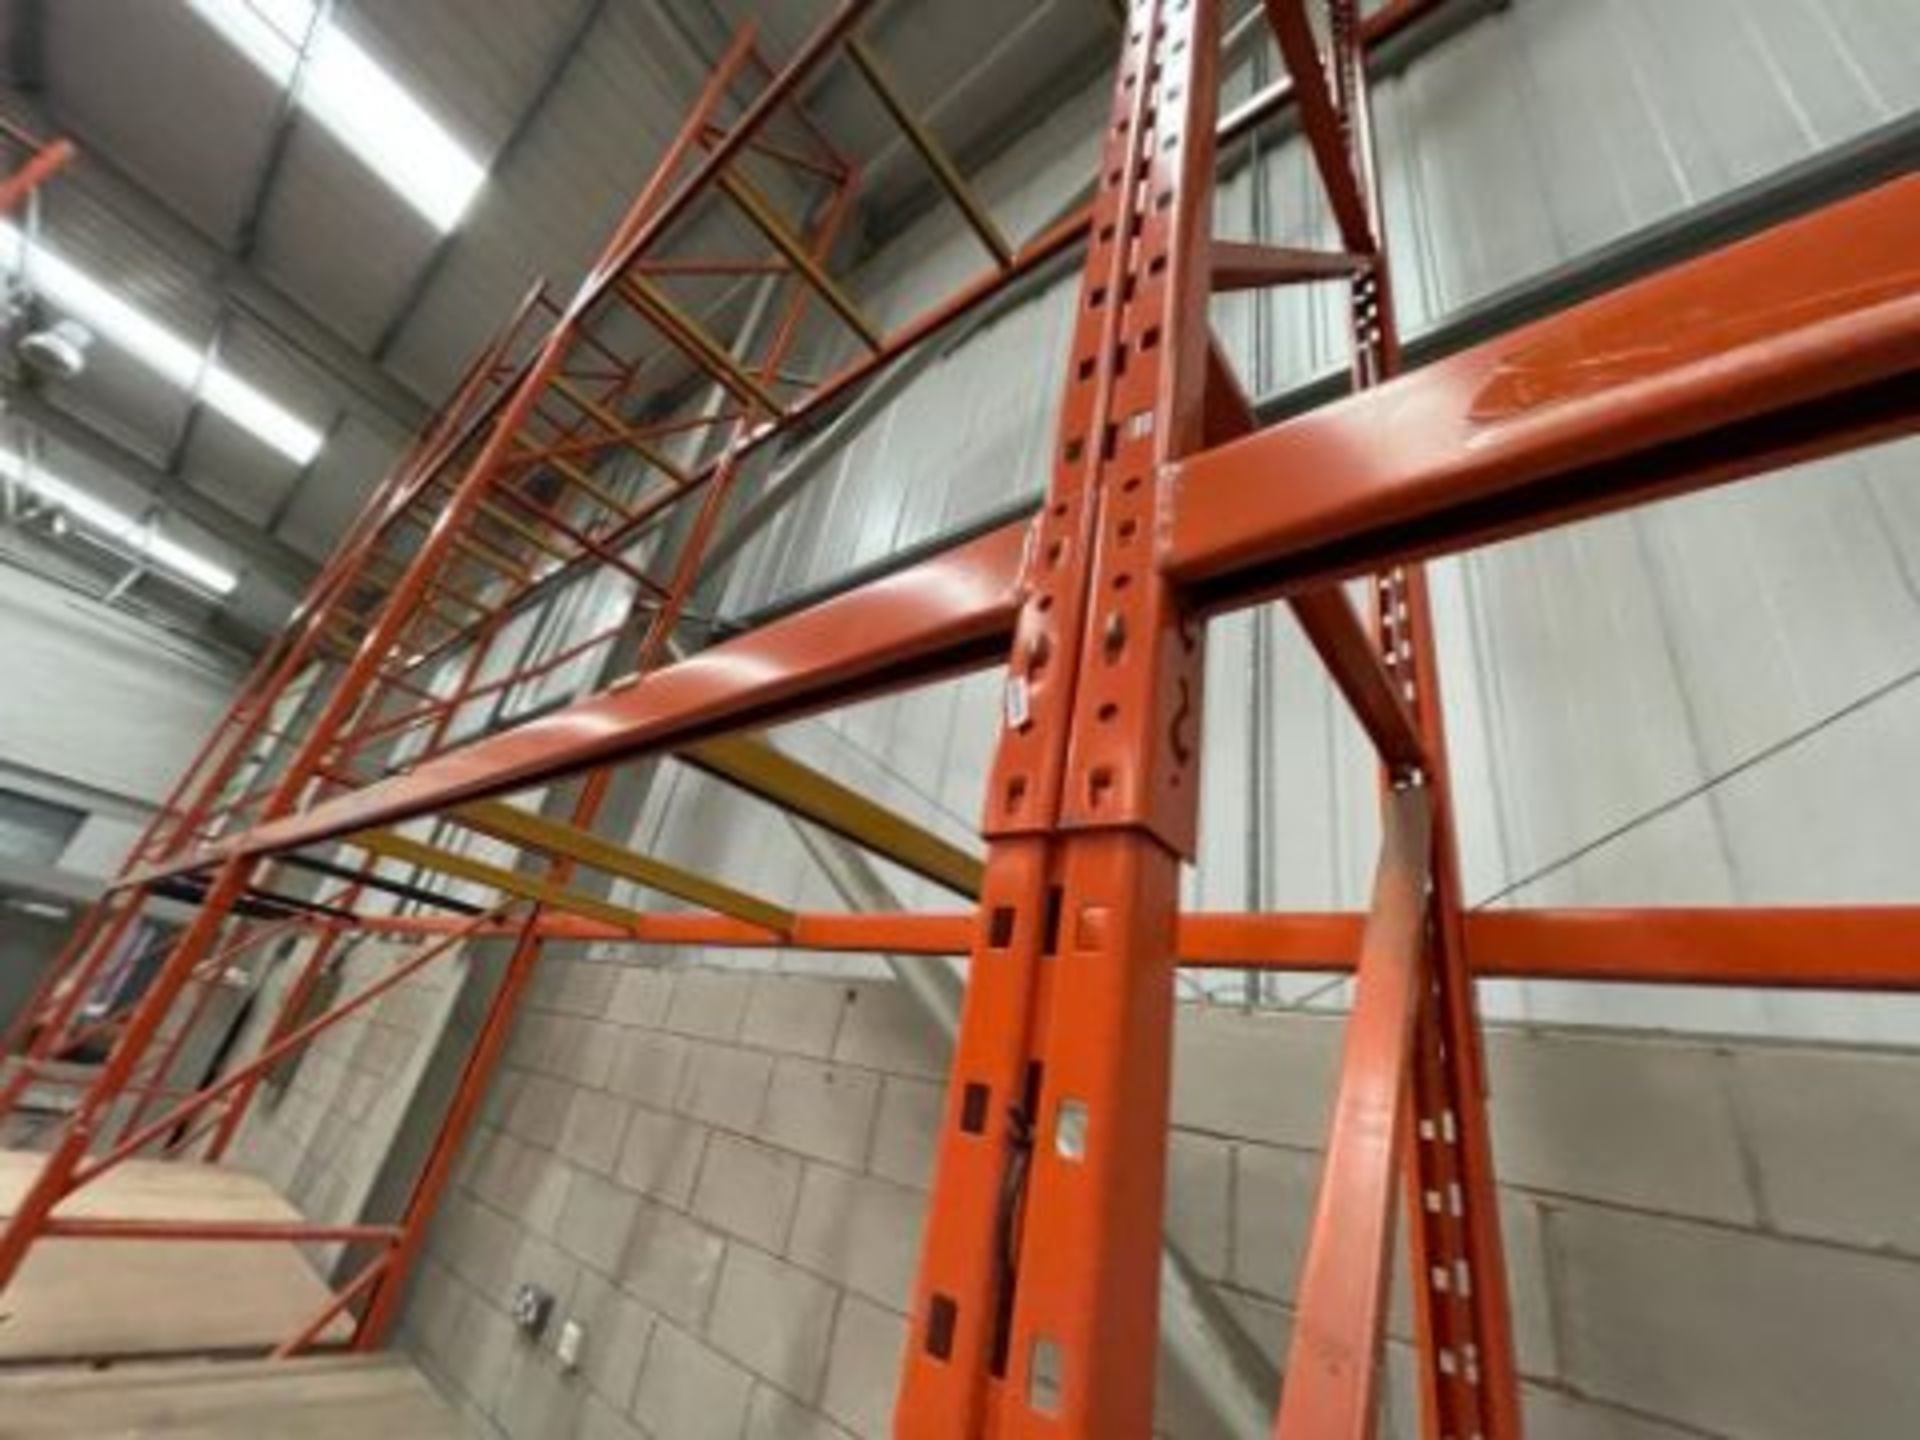 3 x Bays of RediRack Warehouse PALLET RACKING - Lot Includes 4 x Uprights and 18 x Crossbeams - - Image 6 of 9